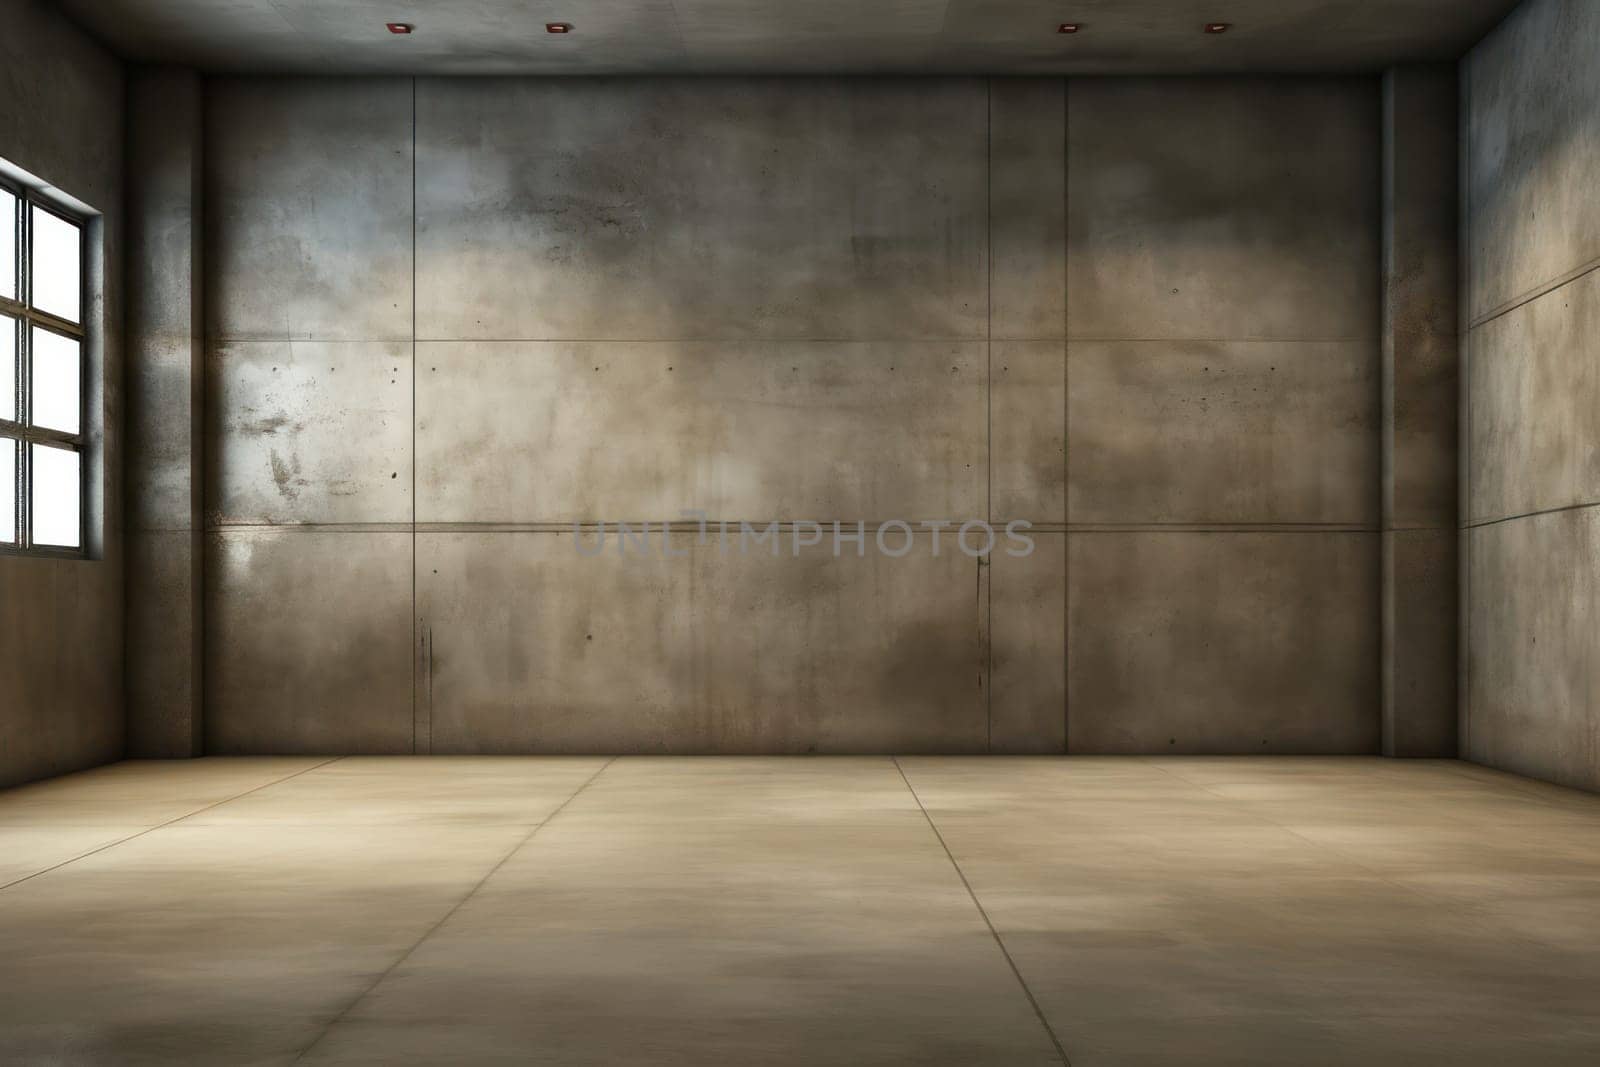 Concrete Grunge: A Dark, Textured Room with Spotlight on an Empty Stone Wall, Creating a Modern Interior Design Concept